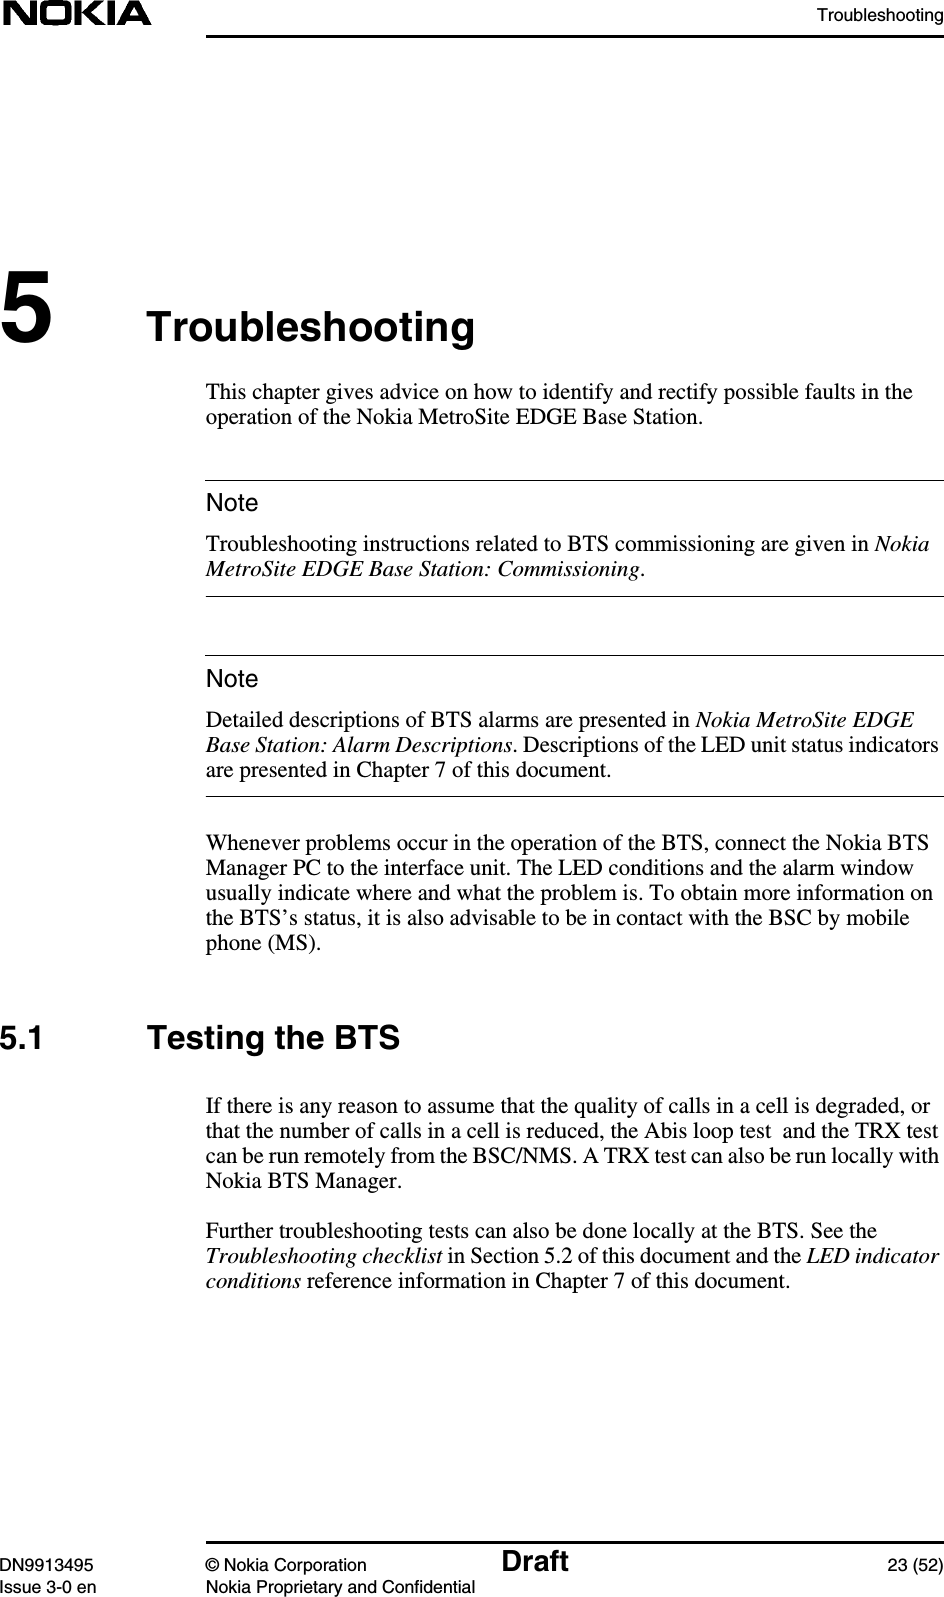 TroubleshootingDN9913495 © Nokia Corporation Draft 23 (52)Issue 3-0 en Nokia Proprietary and ConfidentialNoteNote5TroubleshootingThis chapter gives advice on how to identify and rectify possible faults in theoperation of the Nokia MetroSite EDGE Base Station.Troubleshooting instructions related to BTS commissioning are given in NokiaMetroSite EDGE Base Station: Commissioning.Detailed descriptions of BTS alarms are presented in Nokia MetroSite EDGEBase Station: Alarm Descriptions. Descriptions of the LED unit status indicatorsare presented in Chapter 7 of this document.Whenever problems occur in the operation of the BTS, connect the Nokia BTSManager PC to the interface unit. The LED conditions and the alarm windowusually indicate where and what the problem is. To obtain more information onthe BTS’s status, it is also advisable to be in contact with the BSC by mobilephone (MS).5.1 Testing the BTSIf there is any reason to assume that the quality of calls in a cell is degraded, orthat the number of calls in a cell is reduced, the Abis loop test and the TRX testcan be run remotely from the BSC/NMS. A TRX test can also be run locally withNokia BTS Manager.Further troubleshooting tests can also be done locally at the BTS. See theTroubleshooting checklist in Section 5.2 of this document and the LED indicatorconditions reference information in Chapter 7 of this document.